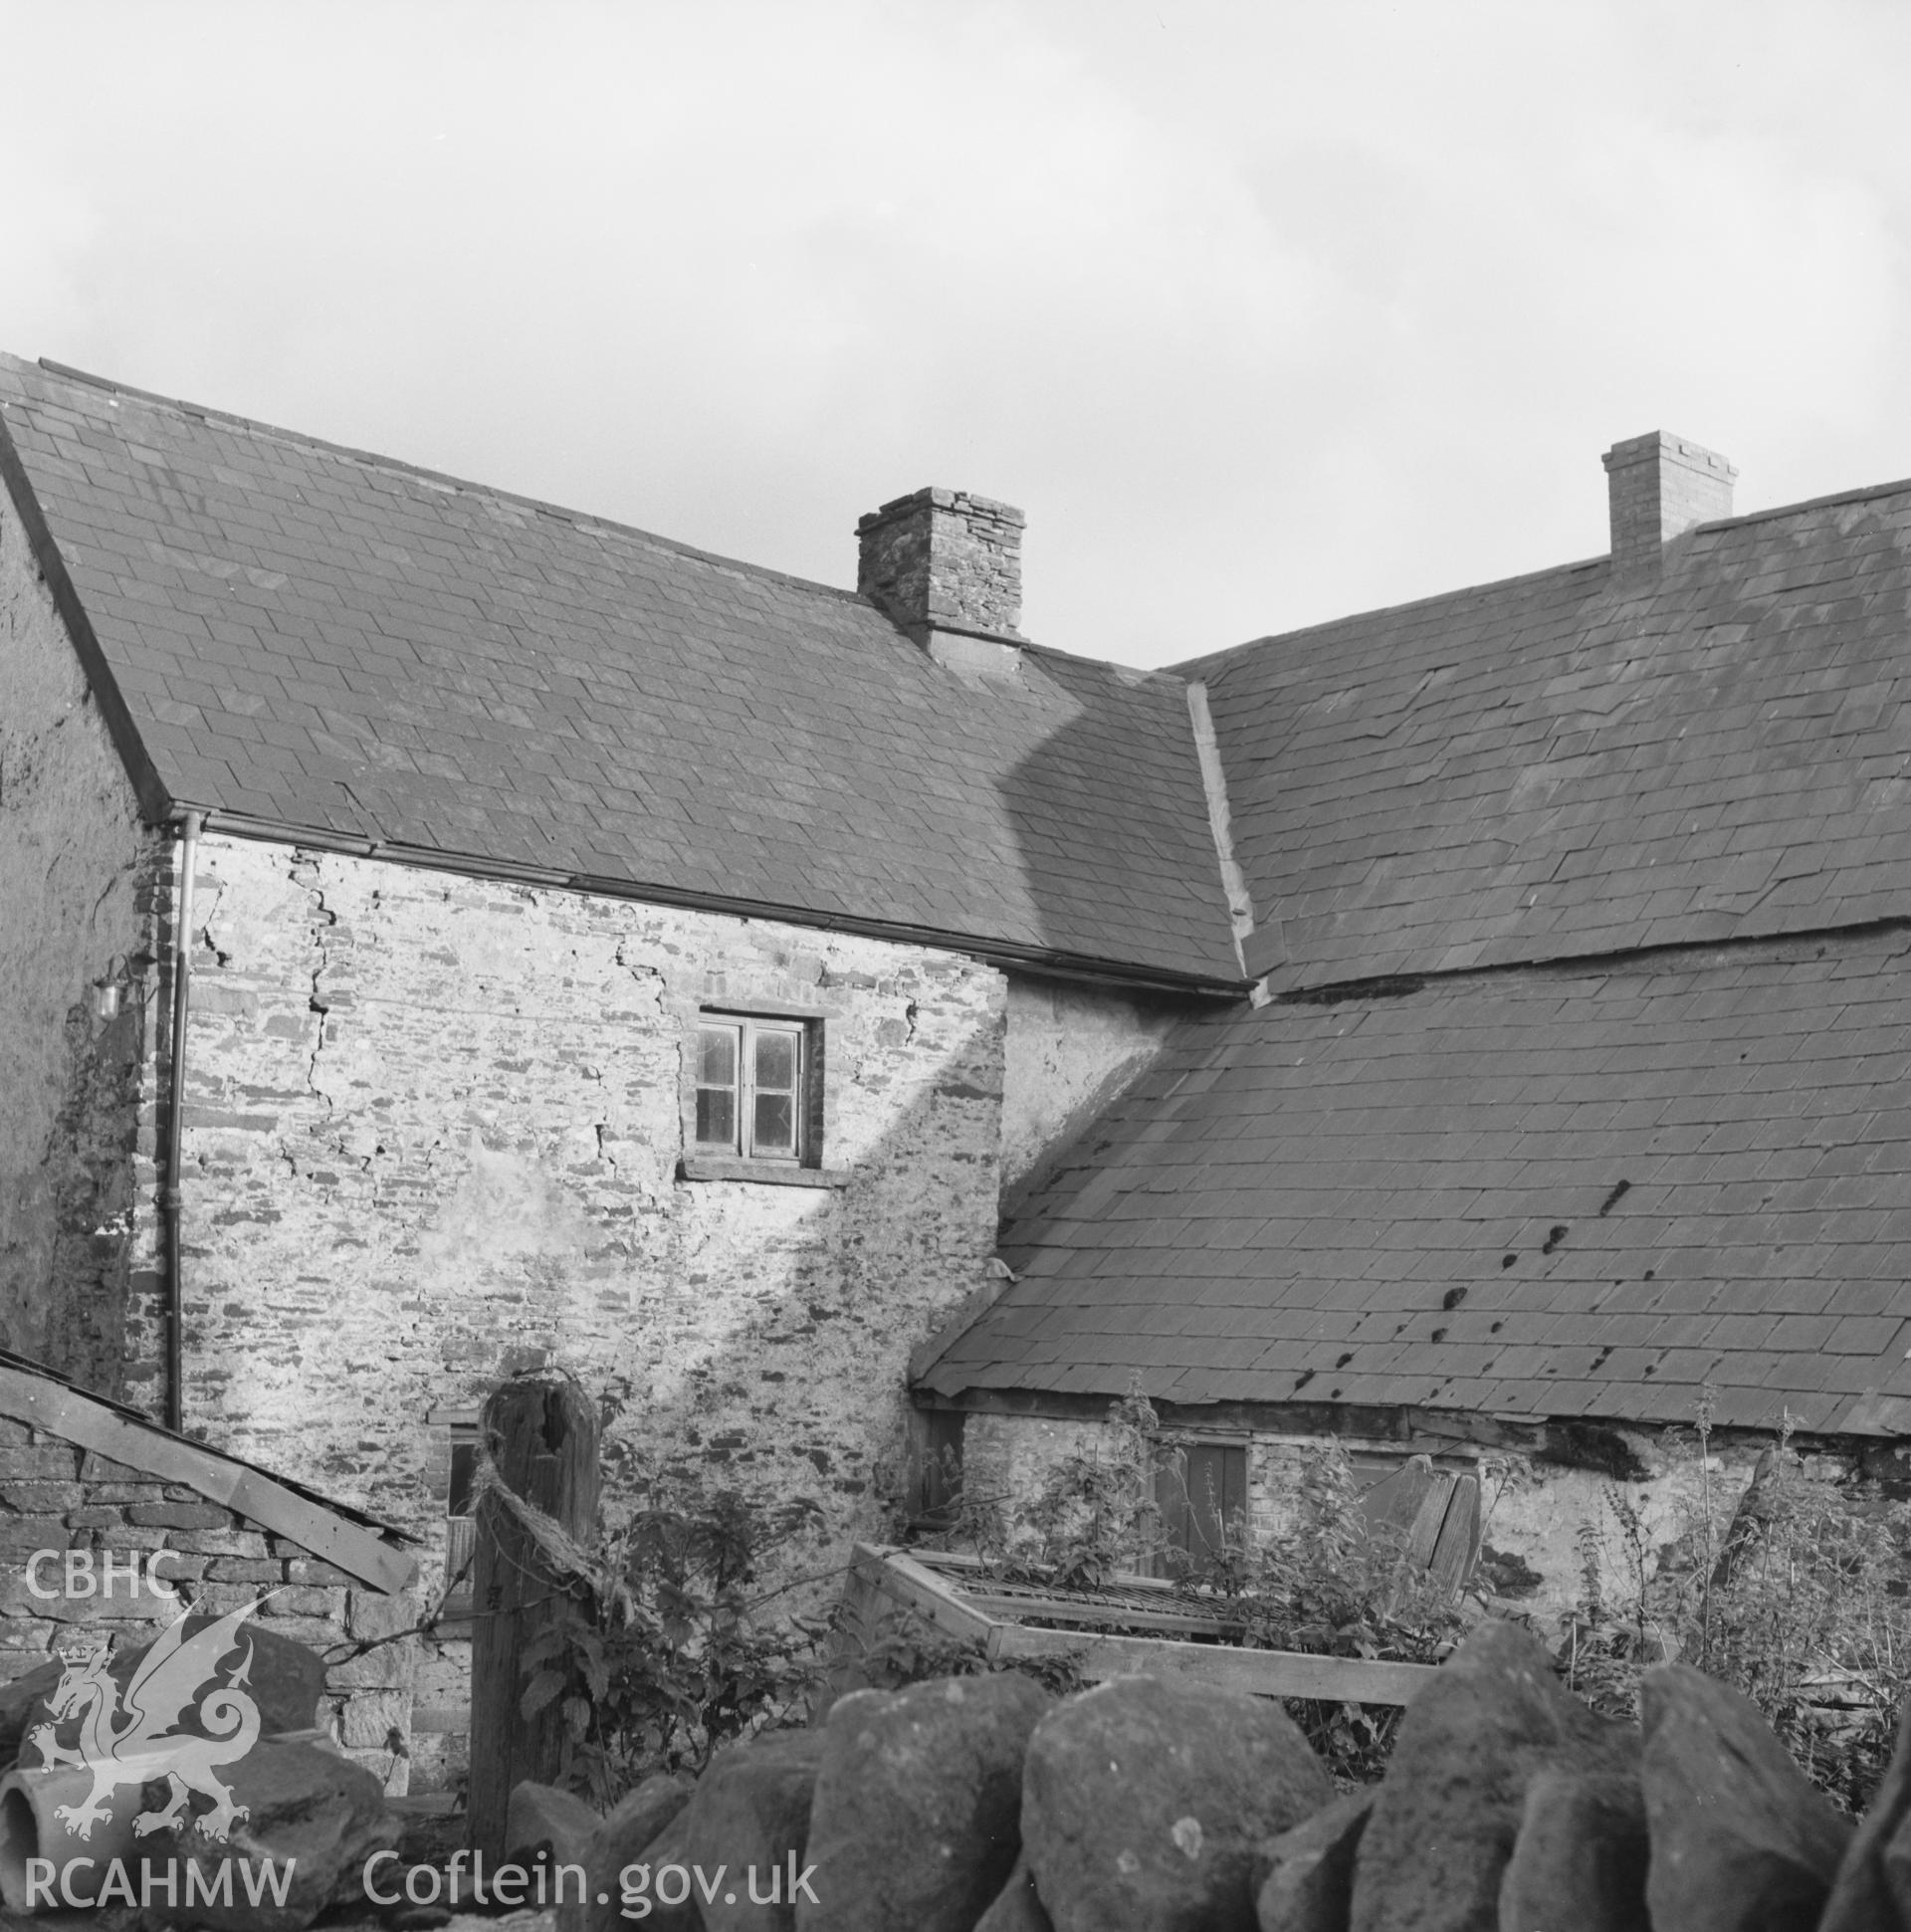 Digital copy of a black and white negative showing Tyle Coch, Bettws, taken 27th November 1965.